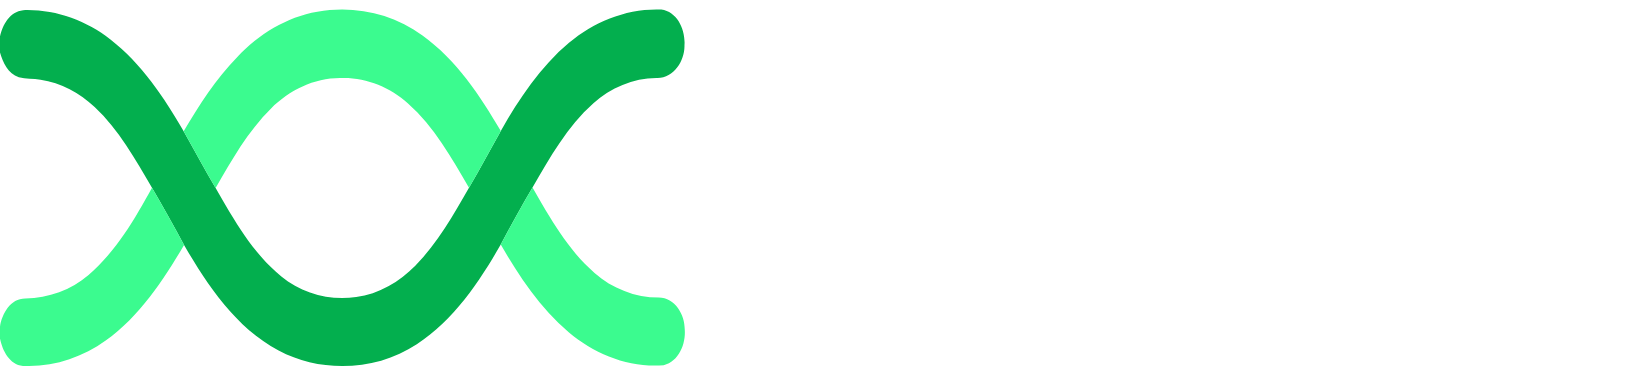 Archaea Energy logo large for dark backgrounds (transparent PNG)